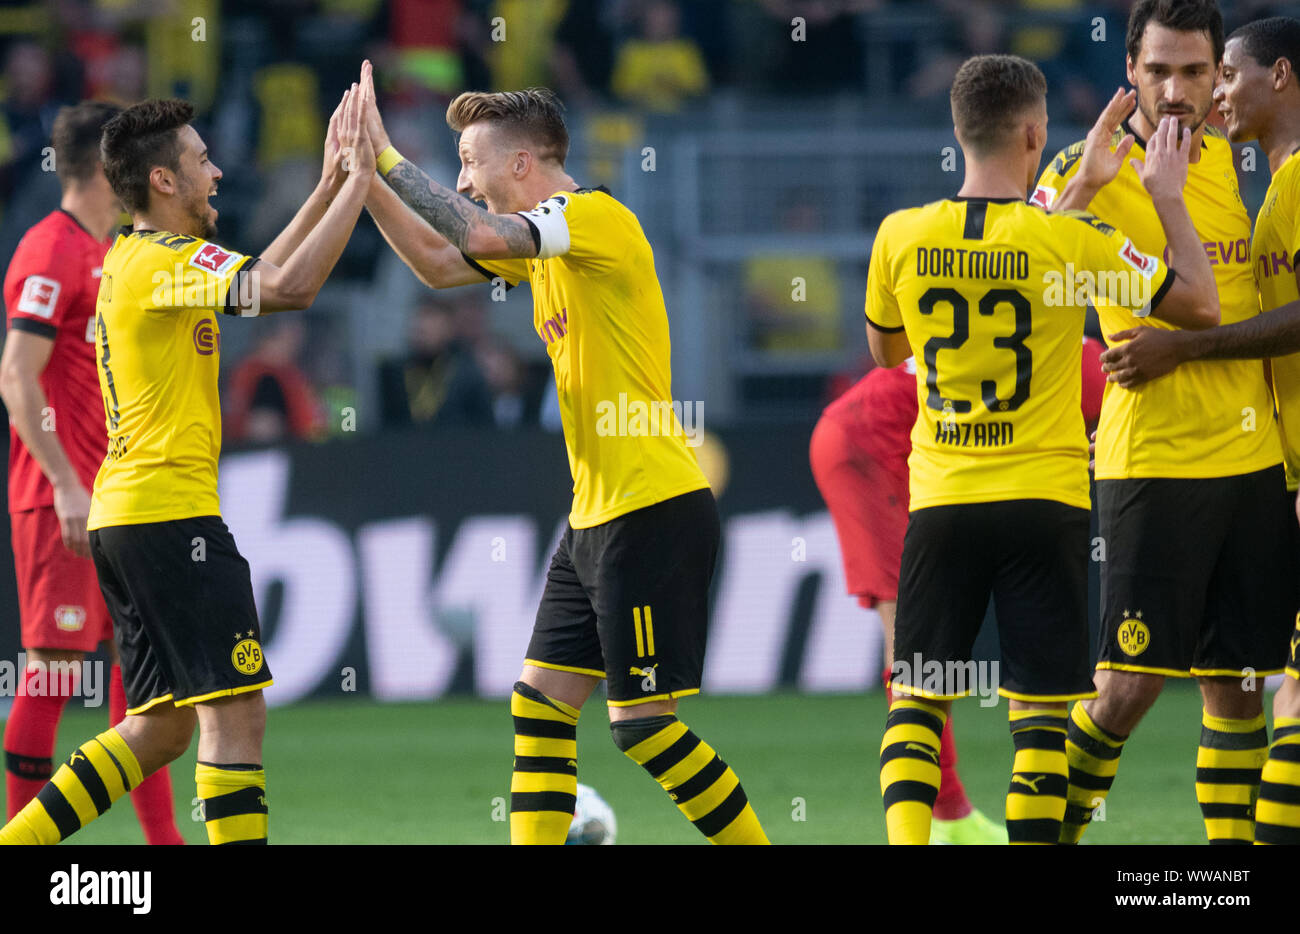 Dortmund, Germany. 14th Sep, 2019. Soccer: Bundesliga, Borussia Dortmund - Bayer Leverkusen, 4th matchday at Signal Iduna Park: Dortmund's Raphael Guerreiro (l) and Marco Reus clap their hands. Credit: Bernd Thissen/dpa - IMPORTANT NOTE: In accordance with the requirements of the DFL Deutsche Fußball Liga or the DFB Deutscher Fußball-Bund, it is prohibited to use or have used photographs taken in the stadium and/or the match in the form of sequence images and/or video-like photo sequences./dpa/Alamy Live News Stock Photo